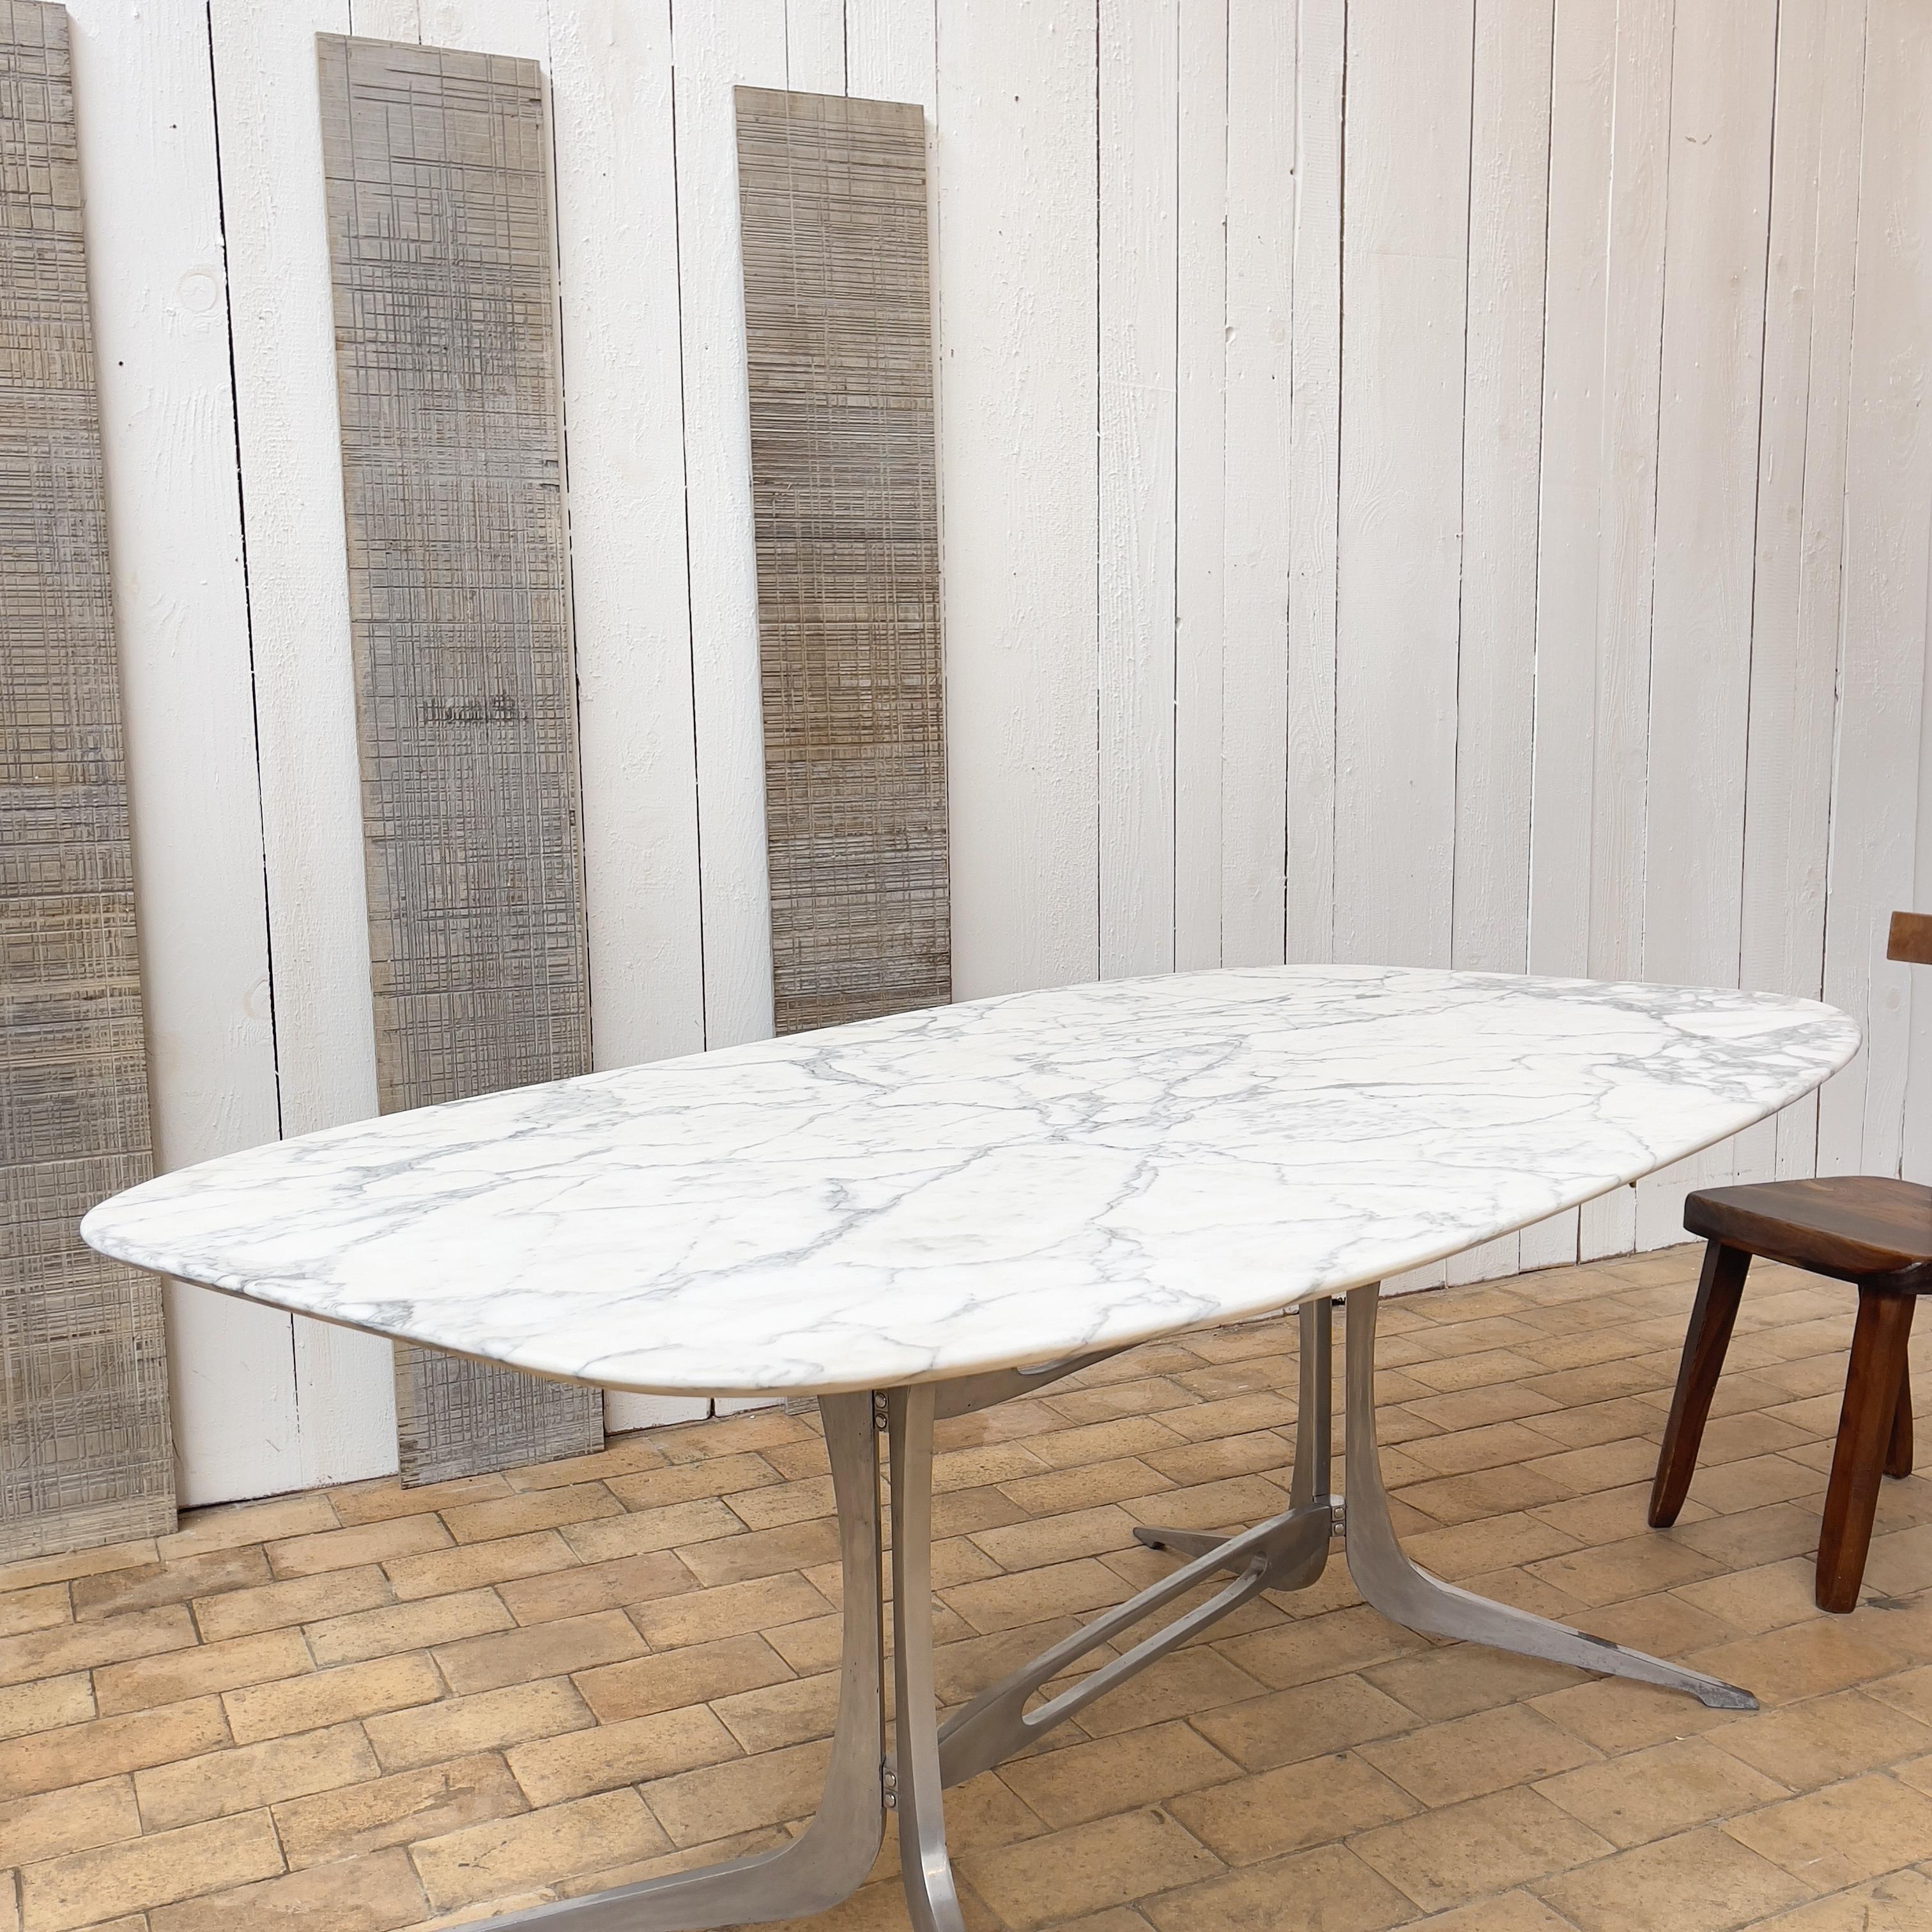 Table Pierre Pichard marble and cast aluminum edition Ligne Roset 1970
Base in cast aluminum and marble top.
Good condition.